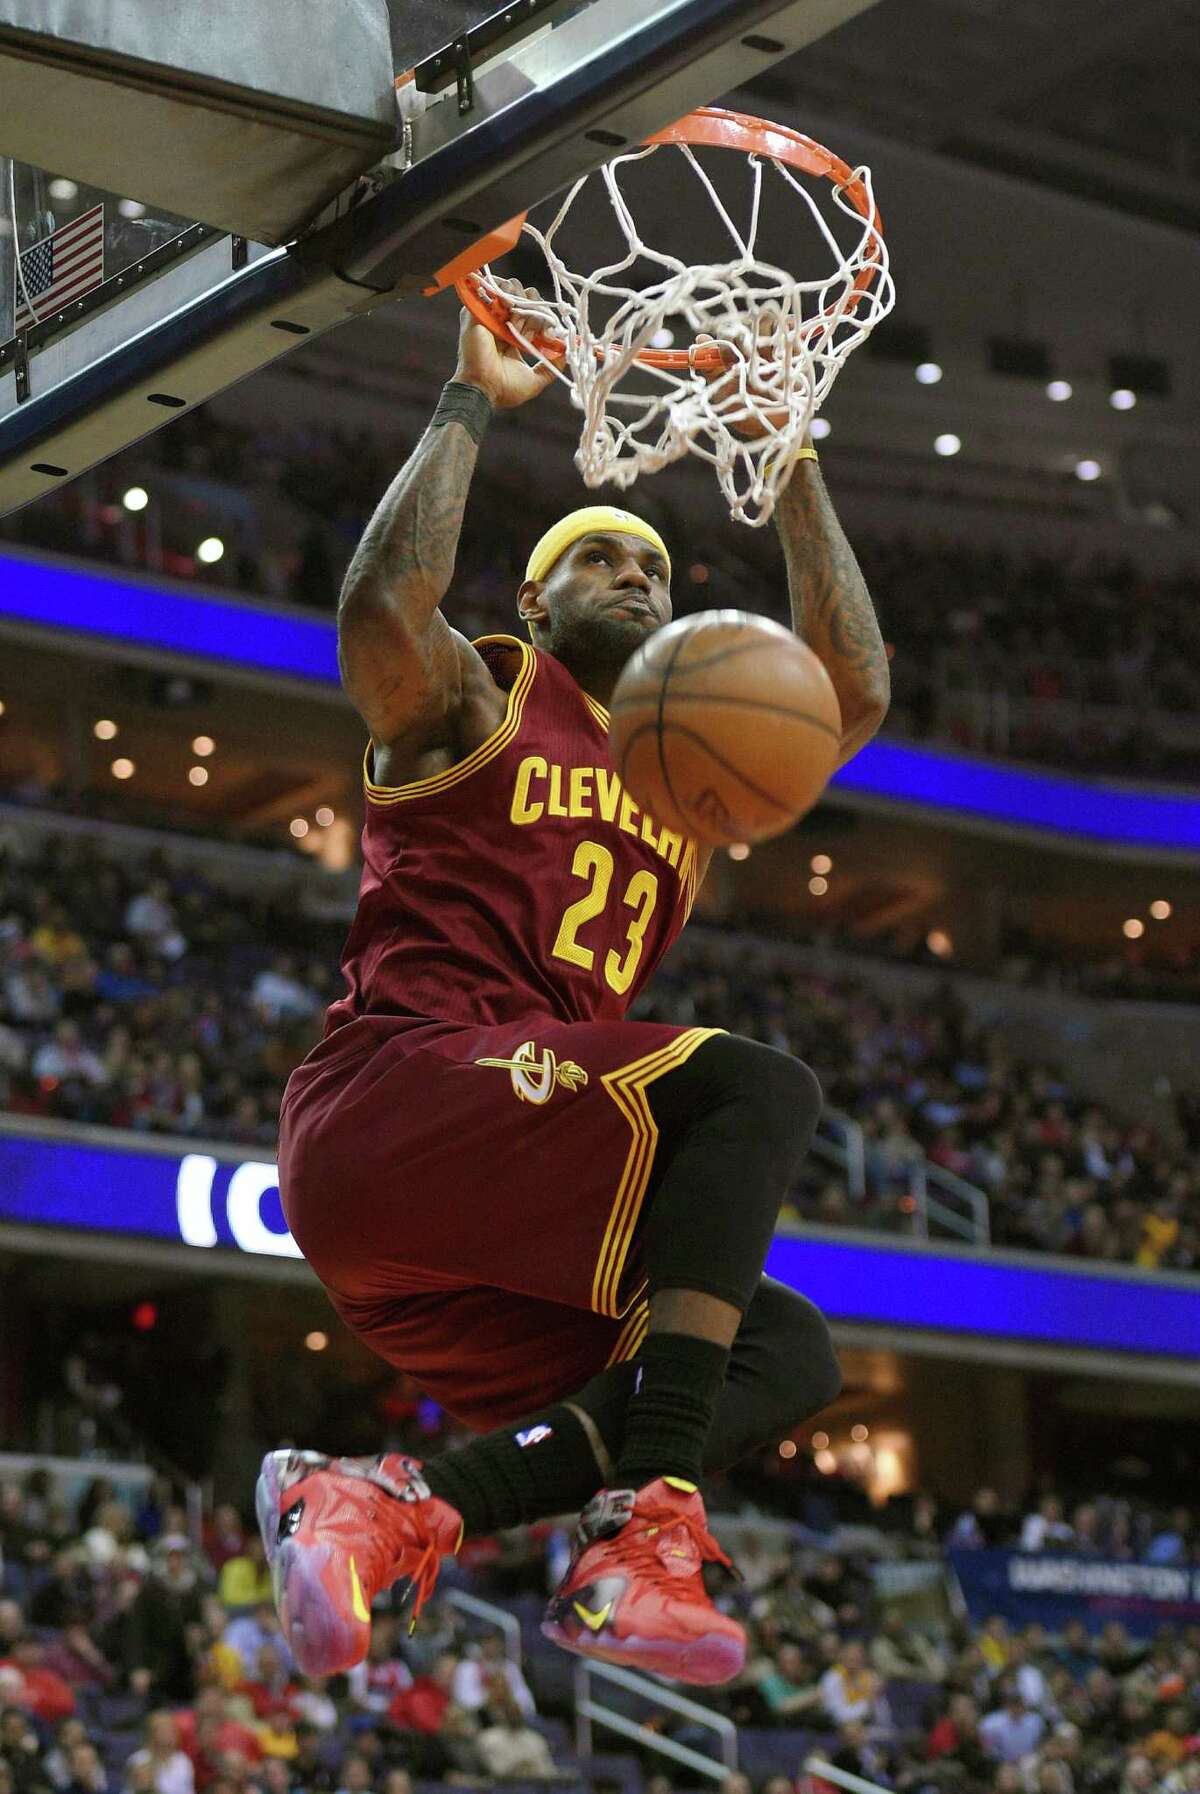 LeBron James jams one home during the Cavaliers' 38-point rout of the Wizards on Friday night. James poured in 28 points in 25 minutes of court time.